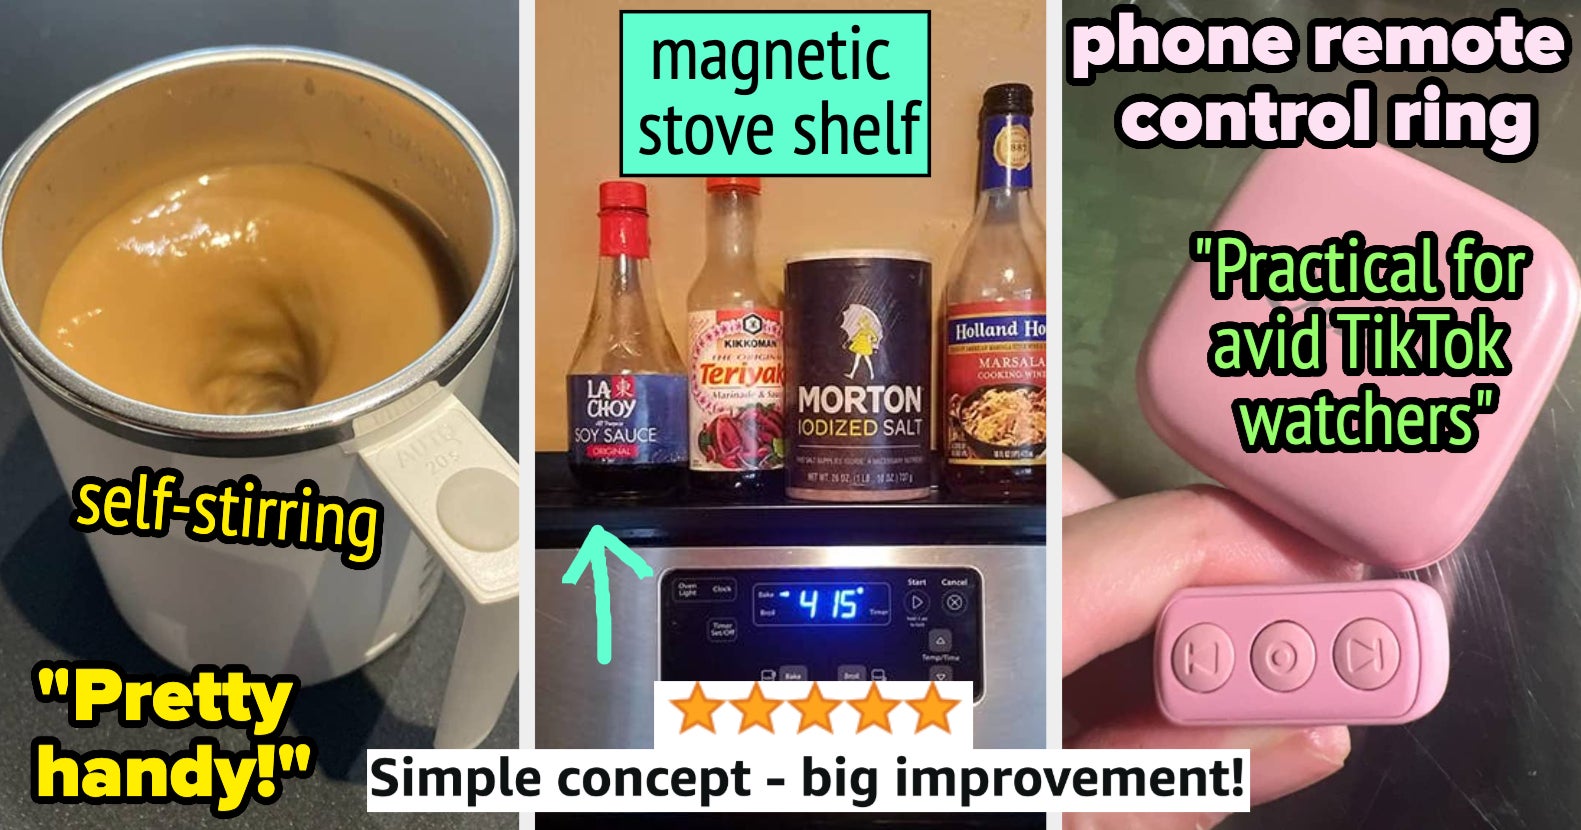 Coffee Cup Heater with Cute Cat Night Light, Auto Shut Off, Smart Coffee  Mug Warmer, 3 Temperature Setting LED Display, Electric Beverage Warmer  Plate for Coffee Tea Milk Cocoa and etc. 